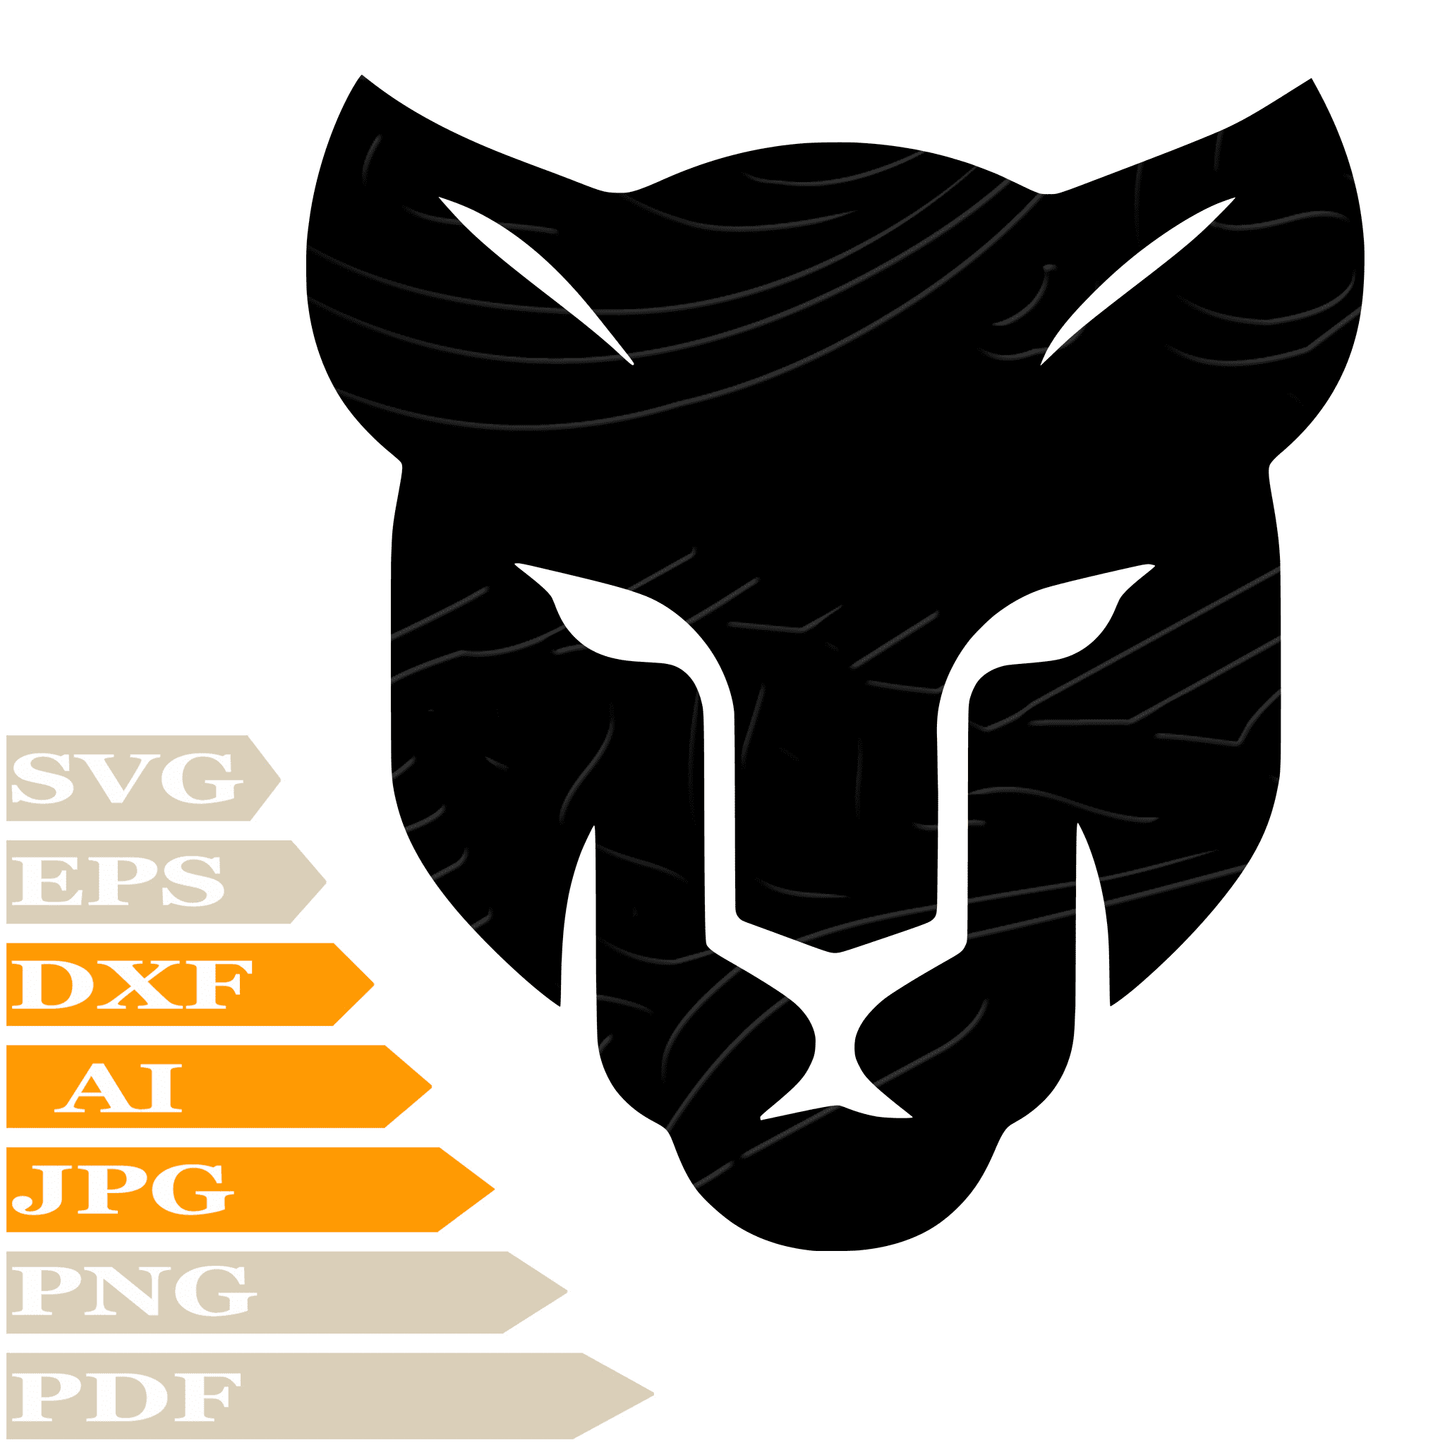 Panther SVG File, Wild Black Panther SVG Design, Panther Head Digital Vector, Panther PNG, PDF, DXF, For Cricut, Clipart, Cut File,  Print, Instant Download, T-Shirt, For Tattoo, Silhouette